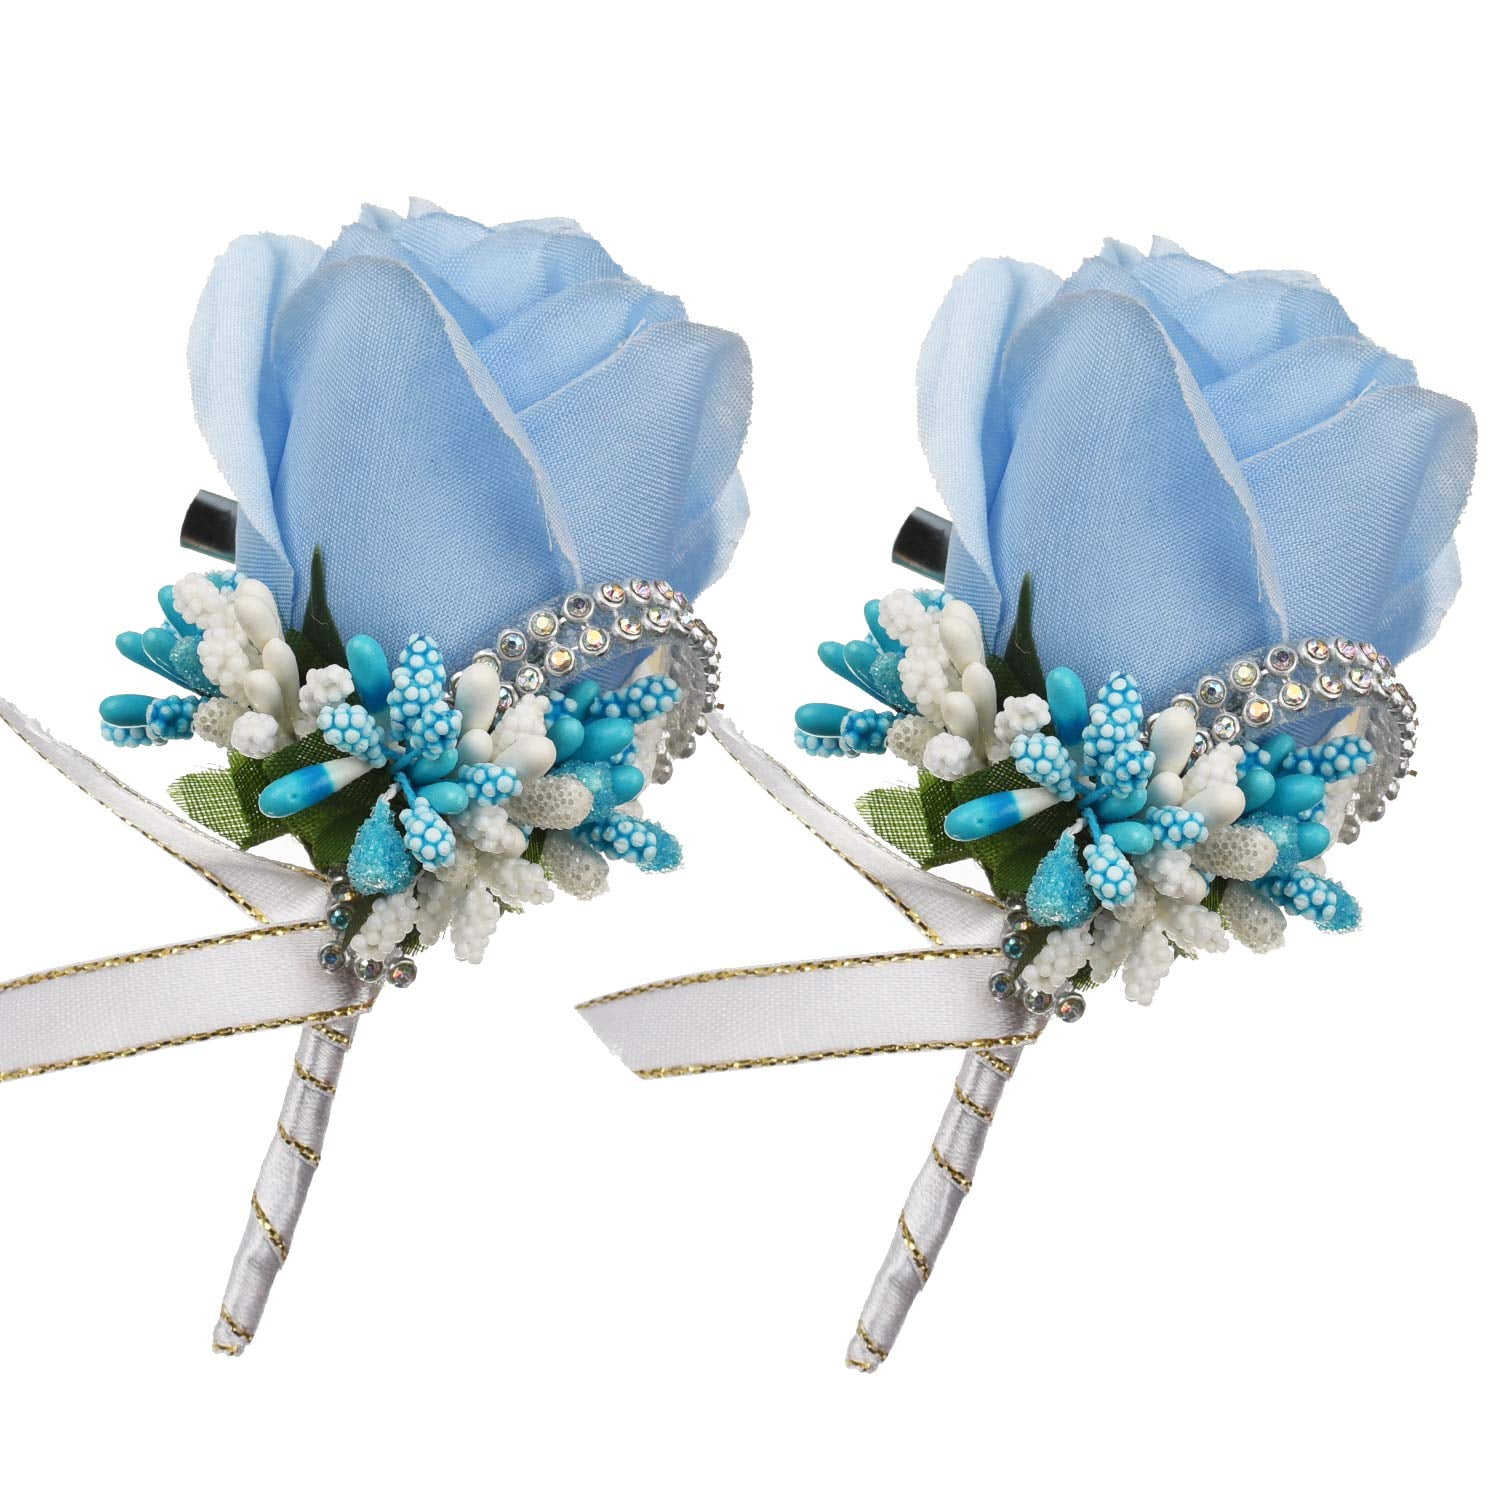 5pcs Boutonnieres w/ Pin Groom Flower Wedding Party Prom Man Suit Decoration 